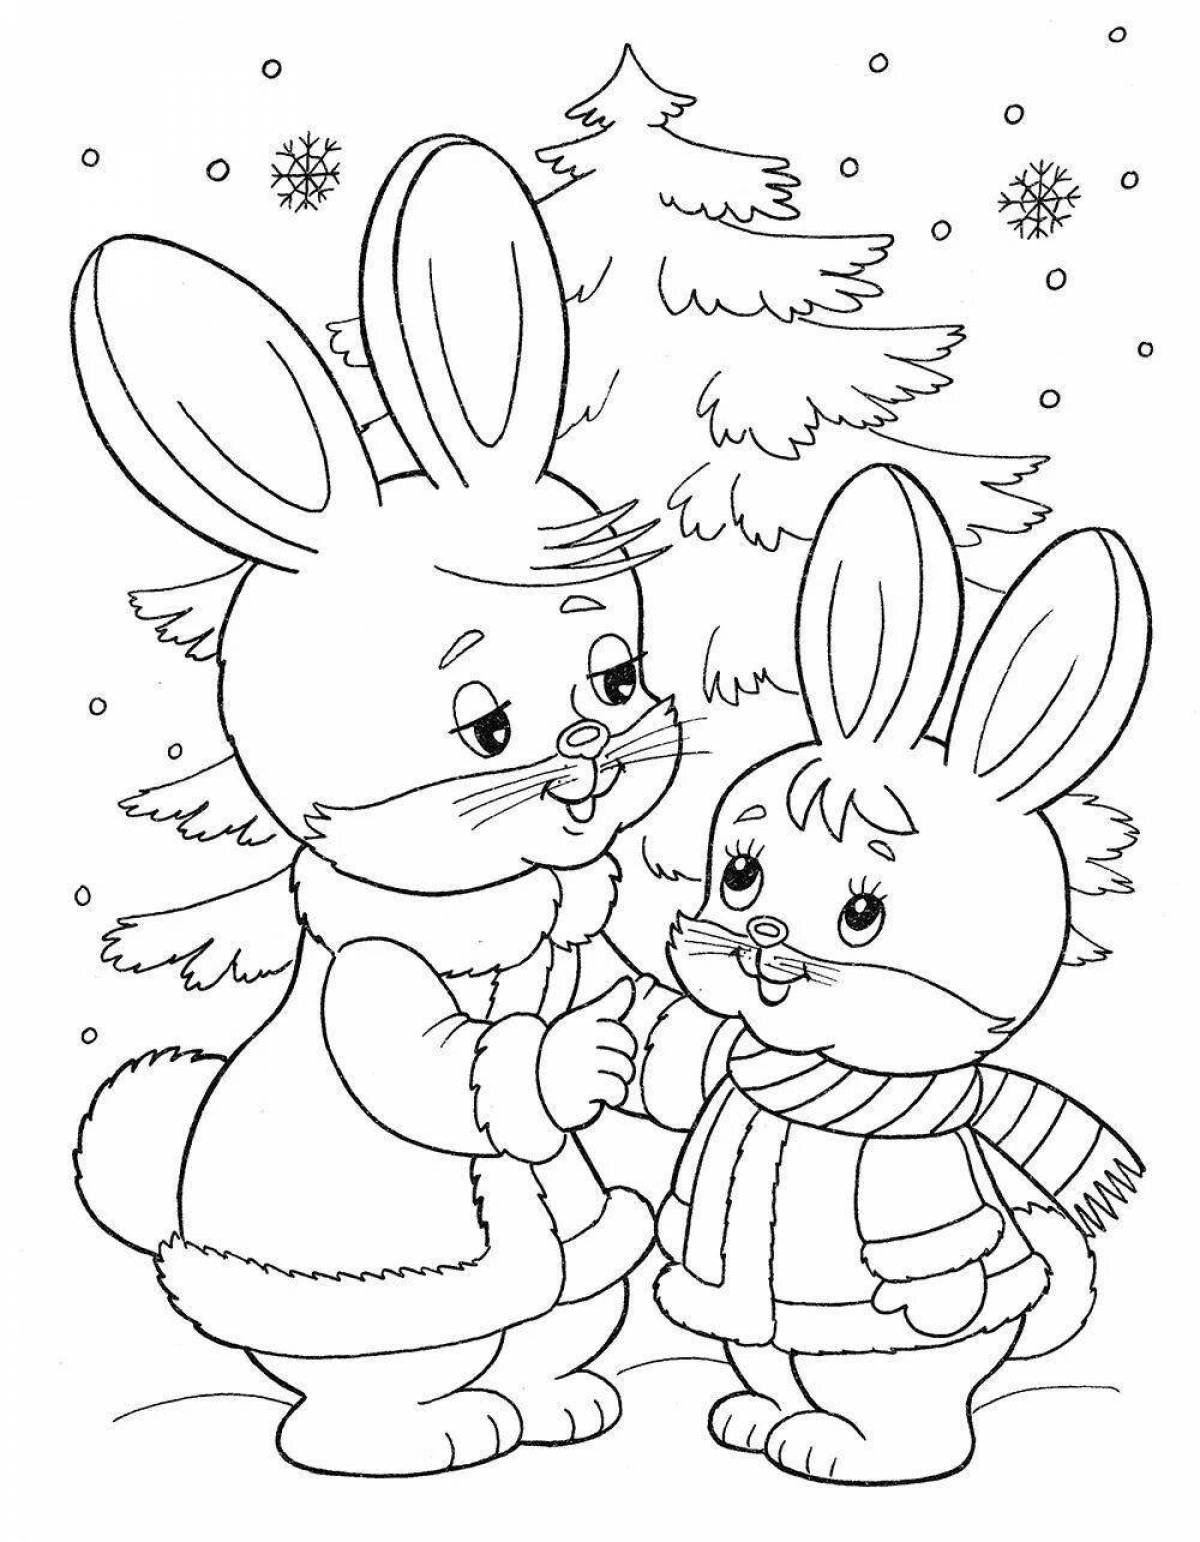 Coloring page holiday bunny and snowman